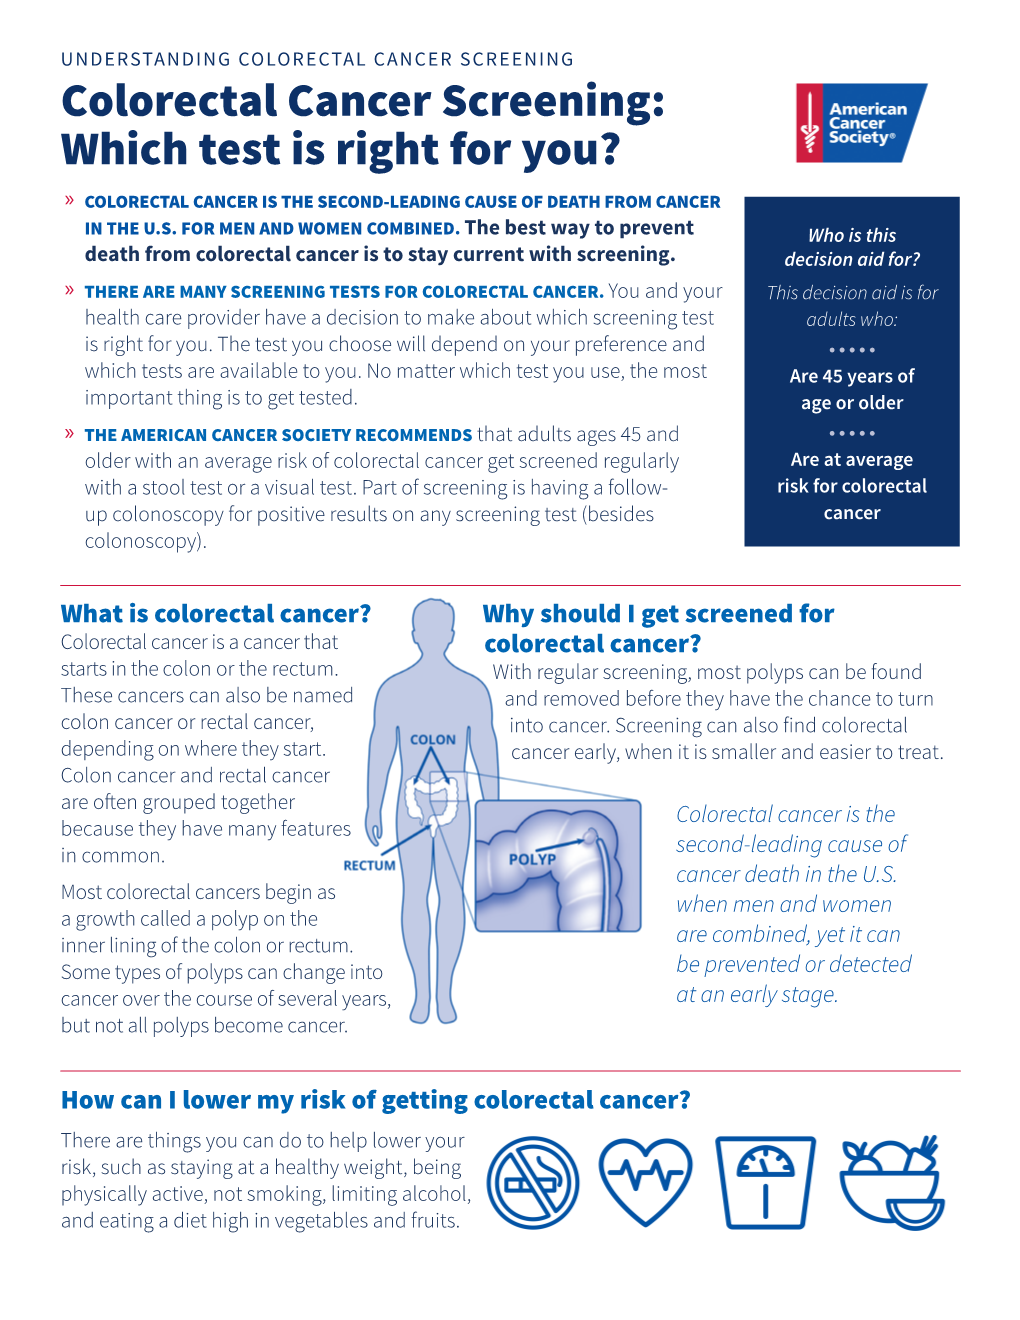 Colorectal Cancer Screening: Which Test Is Right for You?